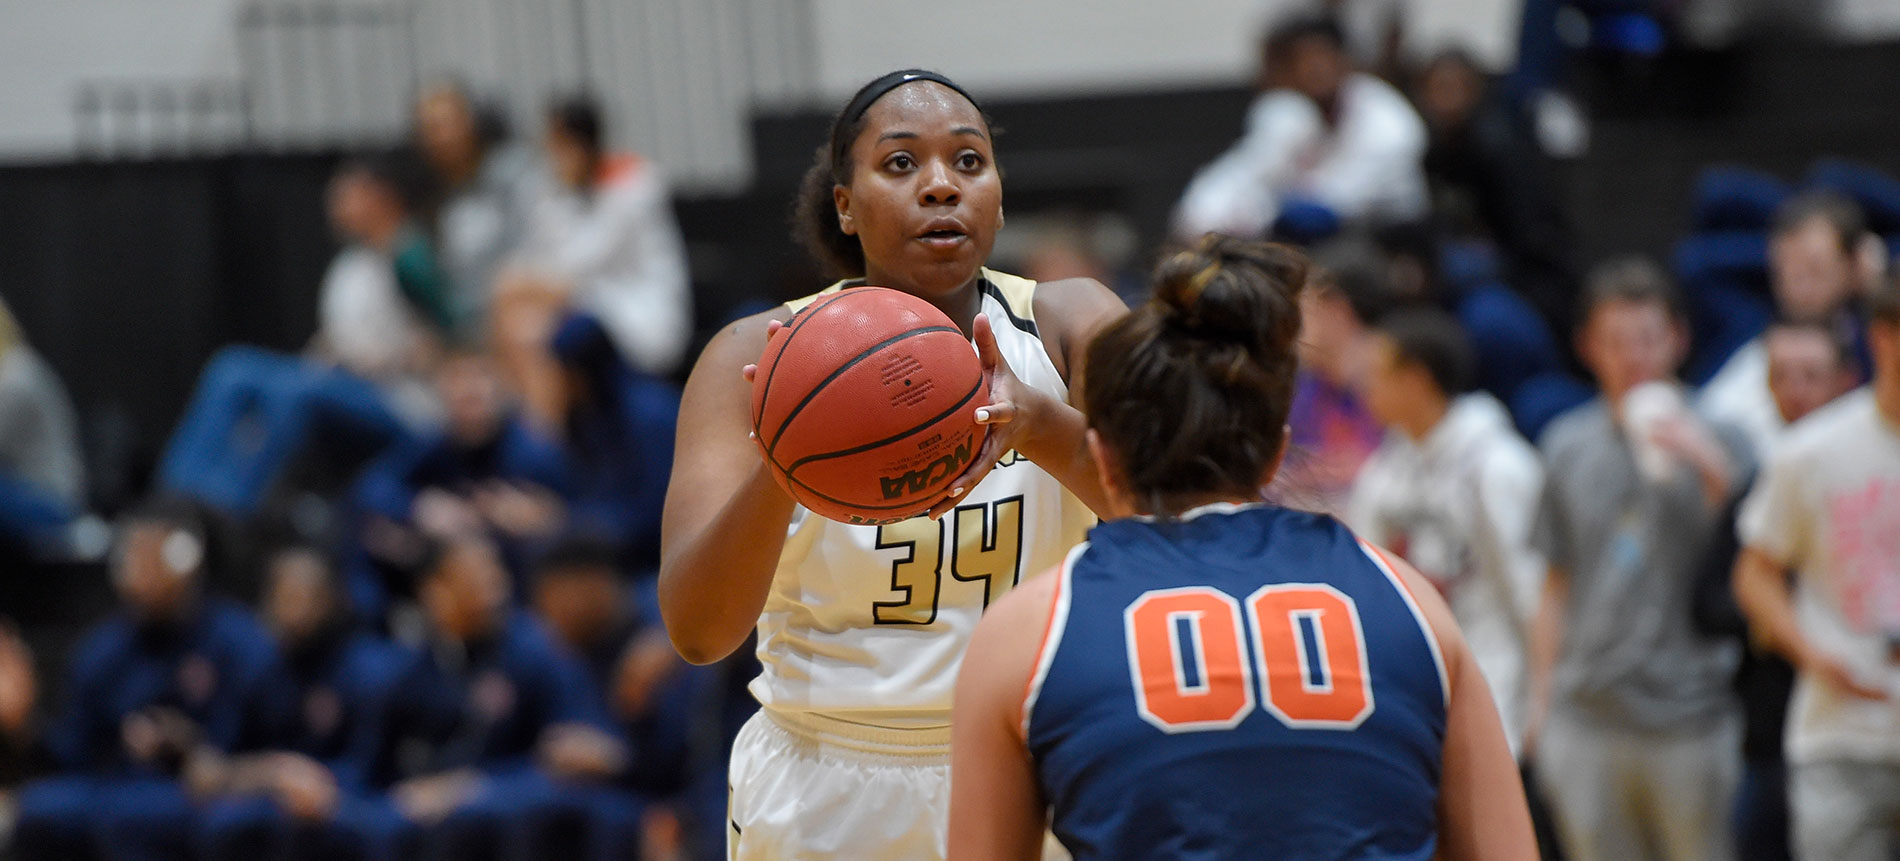 Women’s Basketball Game Notes Released for Catawba